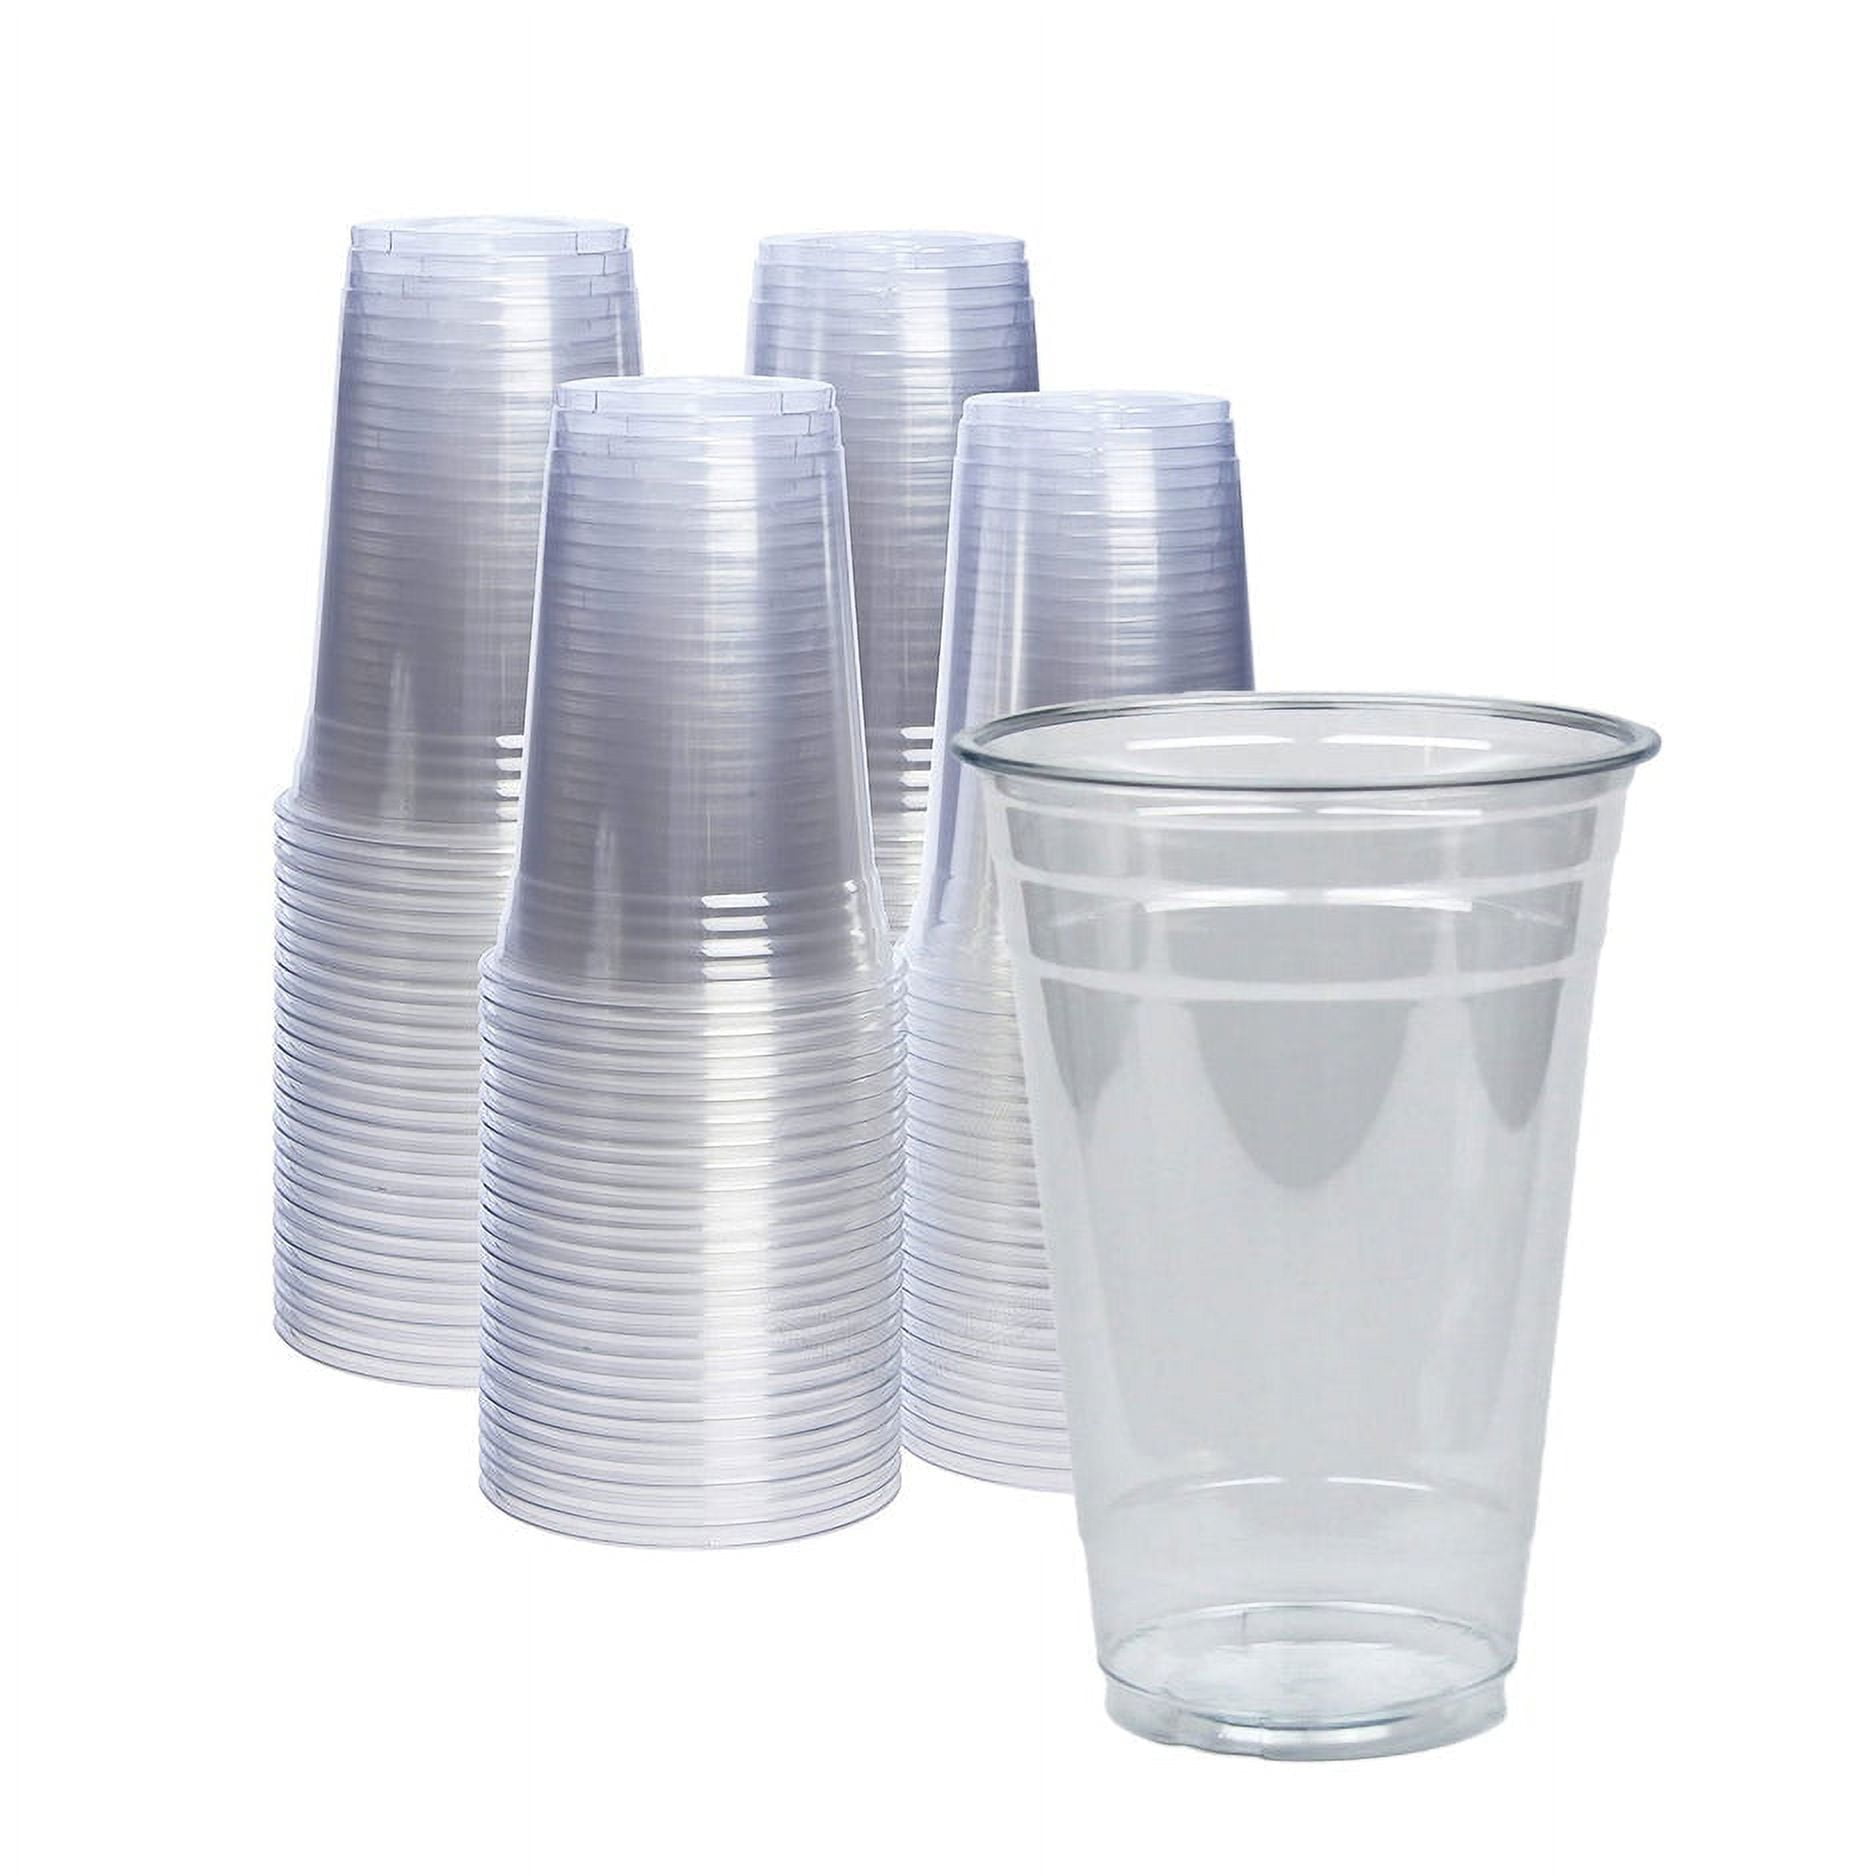 Great Value Disposable Foam Cups, 16 oz, 60 Count 